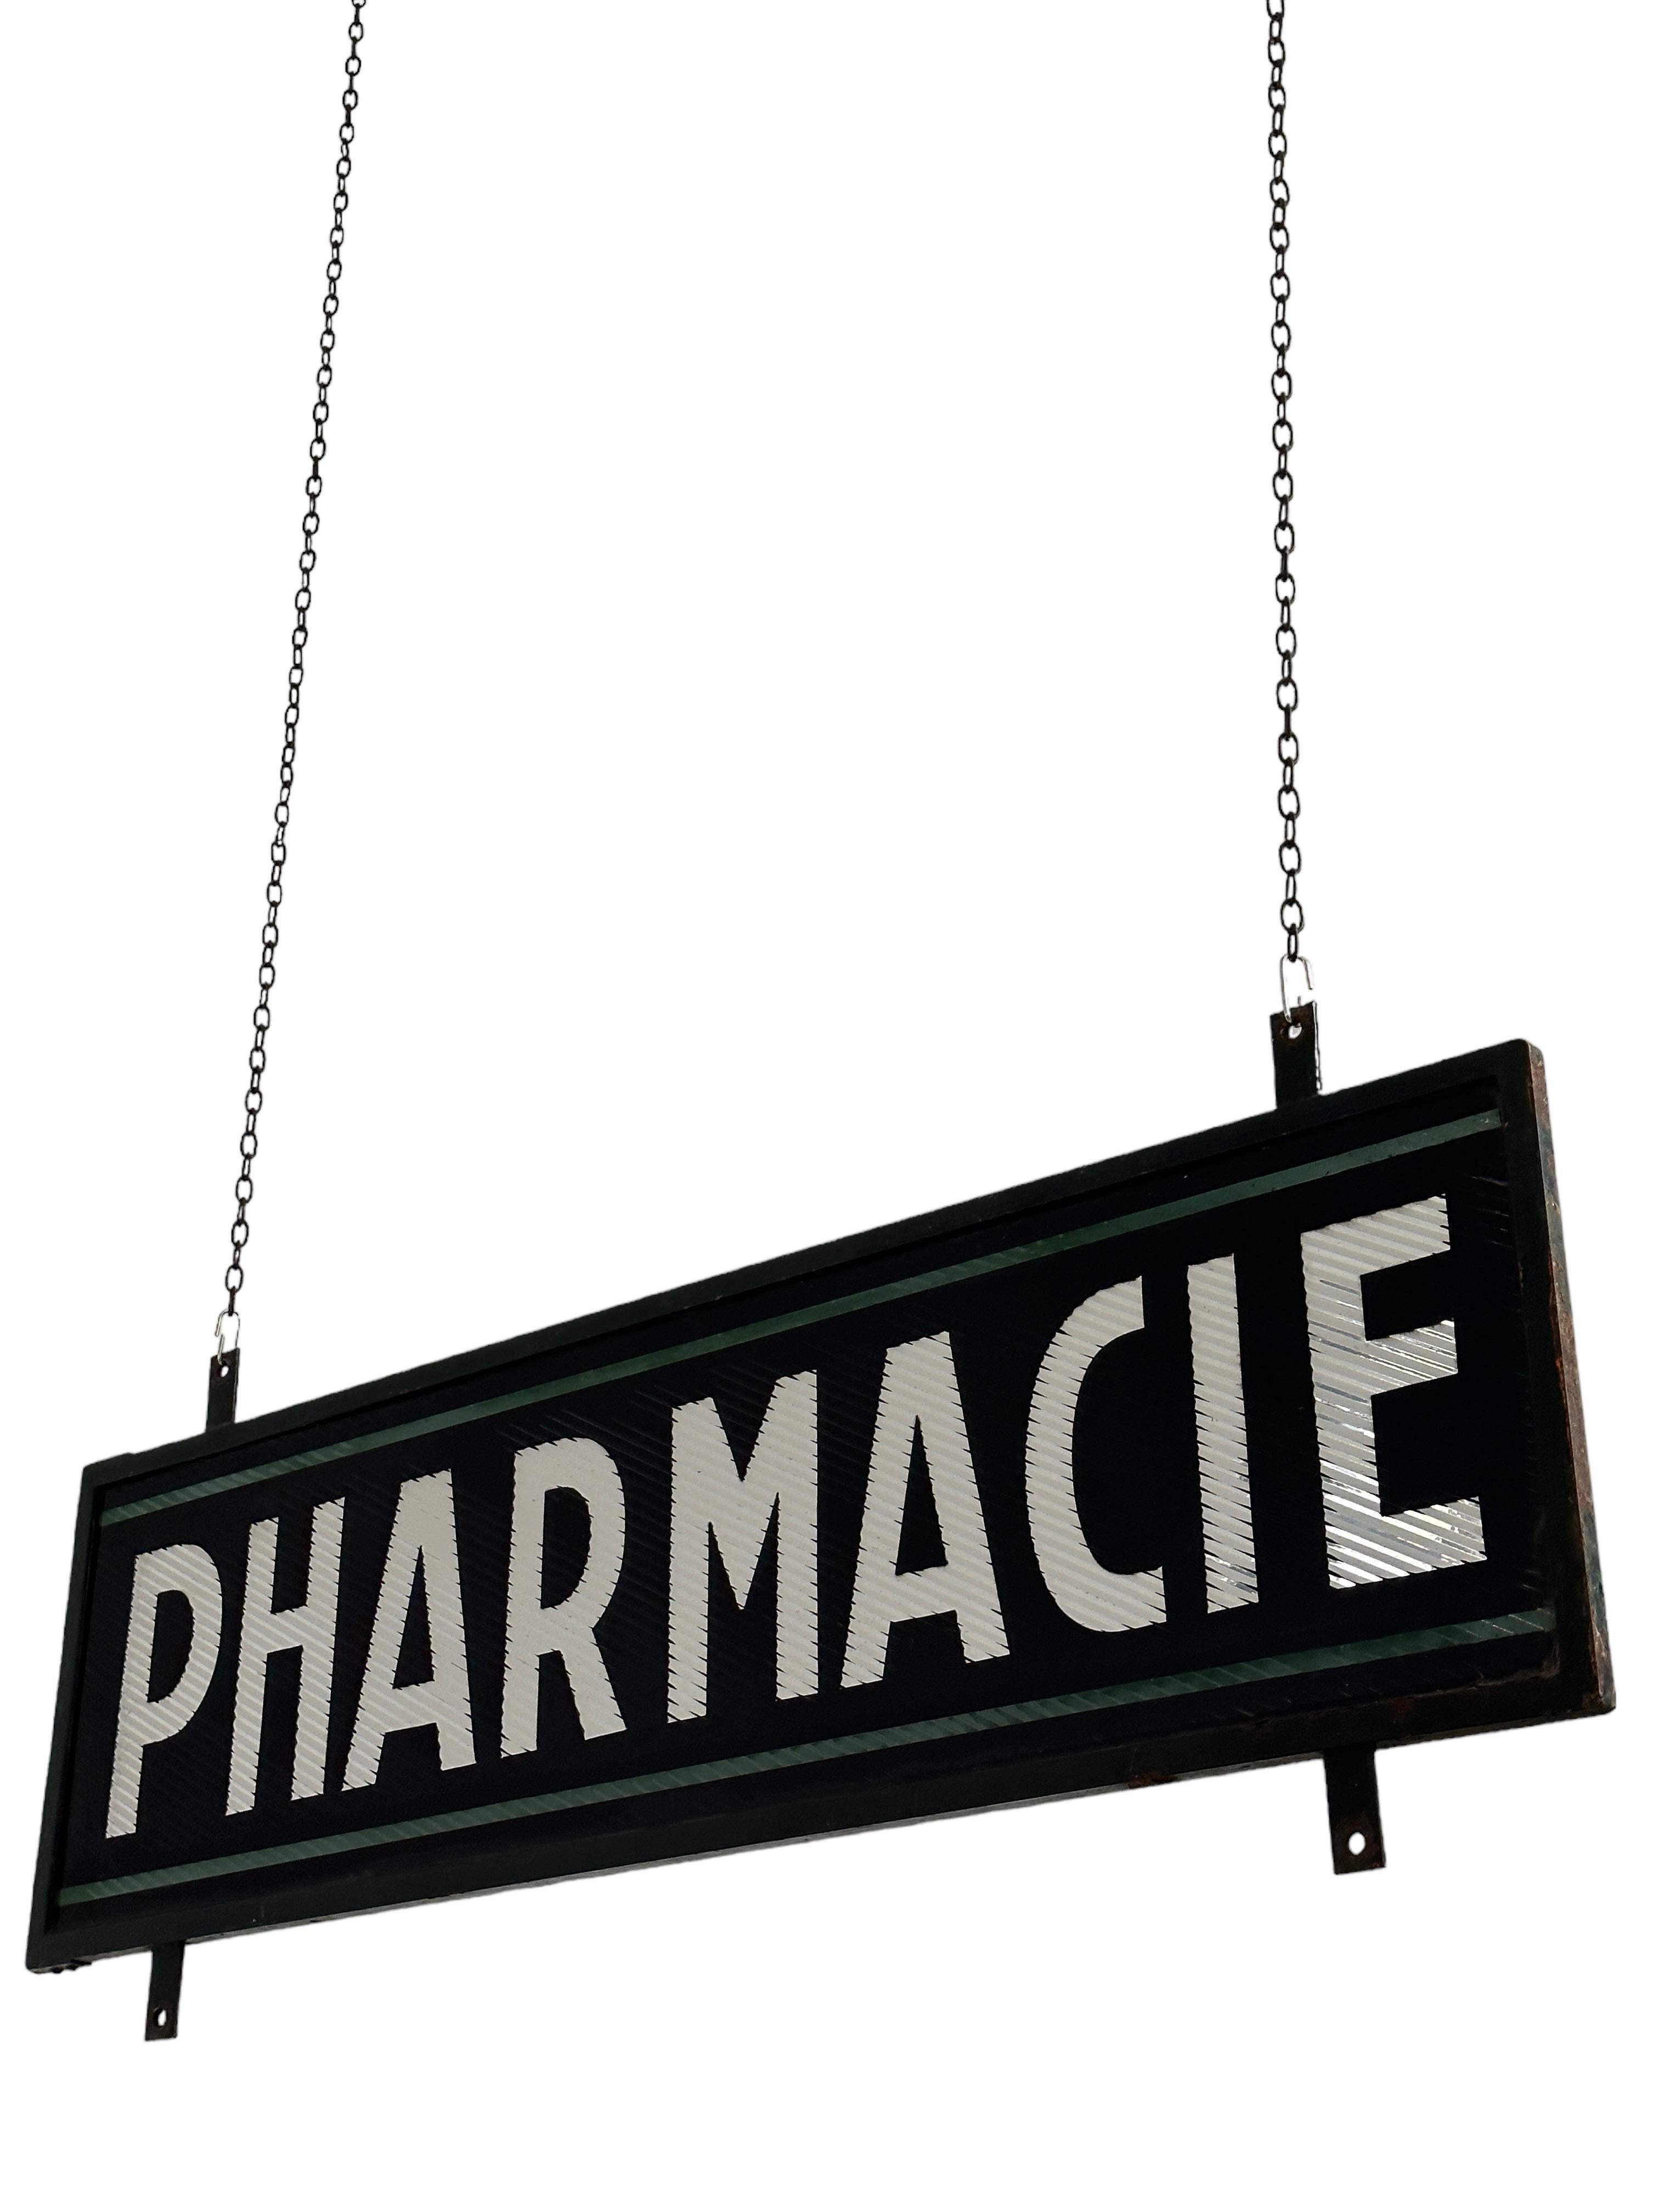 - A beautiful and rare double sided glass 'Pharmacie' sign mounted in its original frame, France circa 1930.
- The sign is of exceptional quality and has glass to both sides, light would have hit the surface and as it sparkles attract consumer